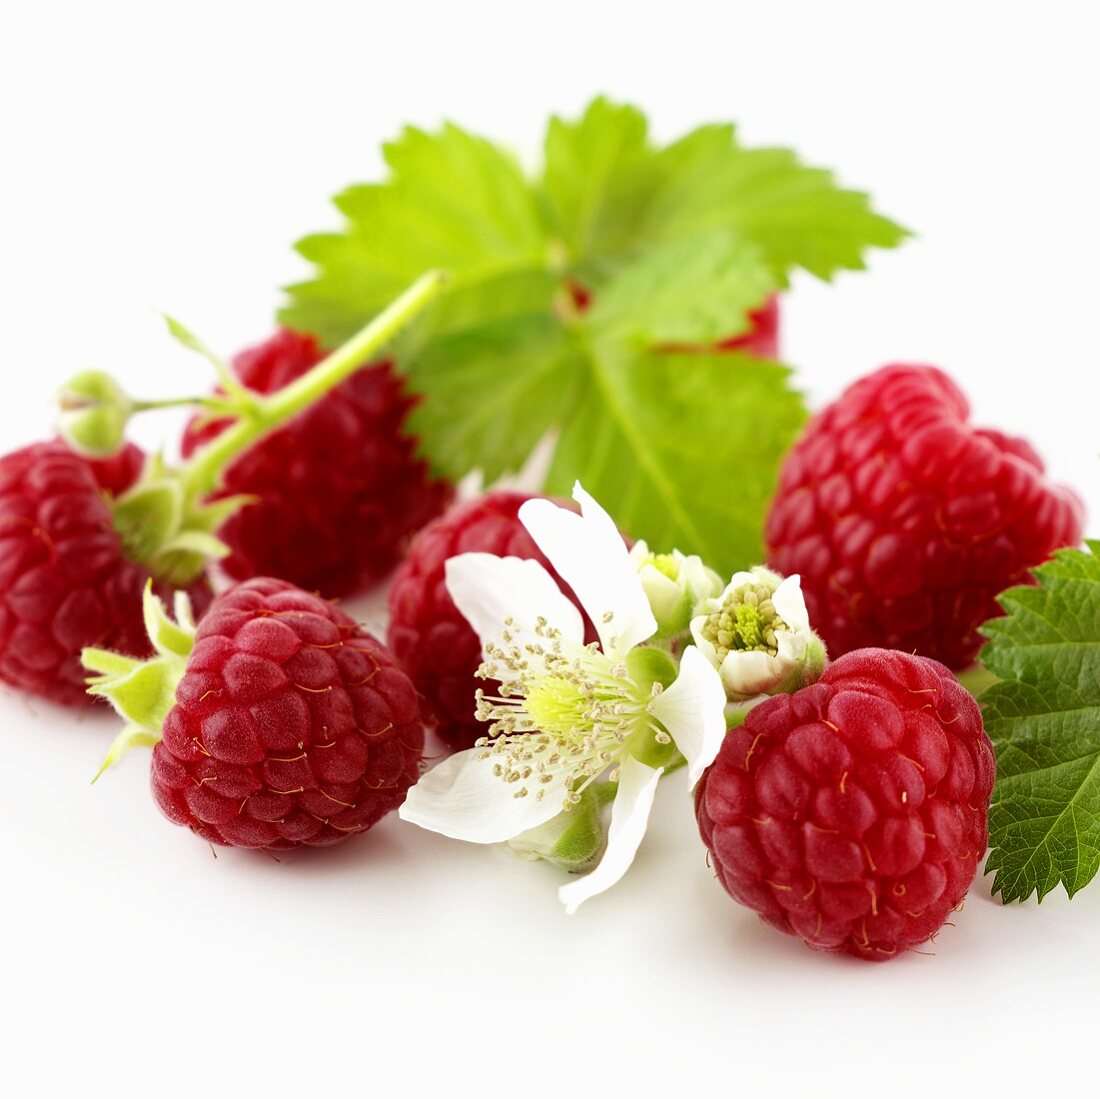 Raspberries with flowers and leaves (close-up)